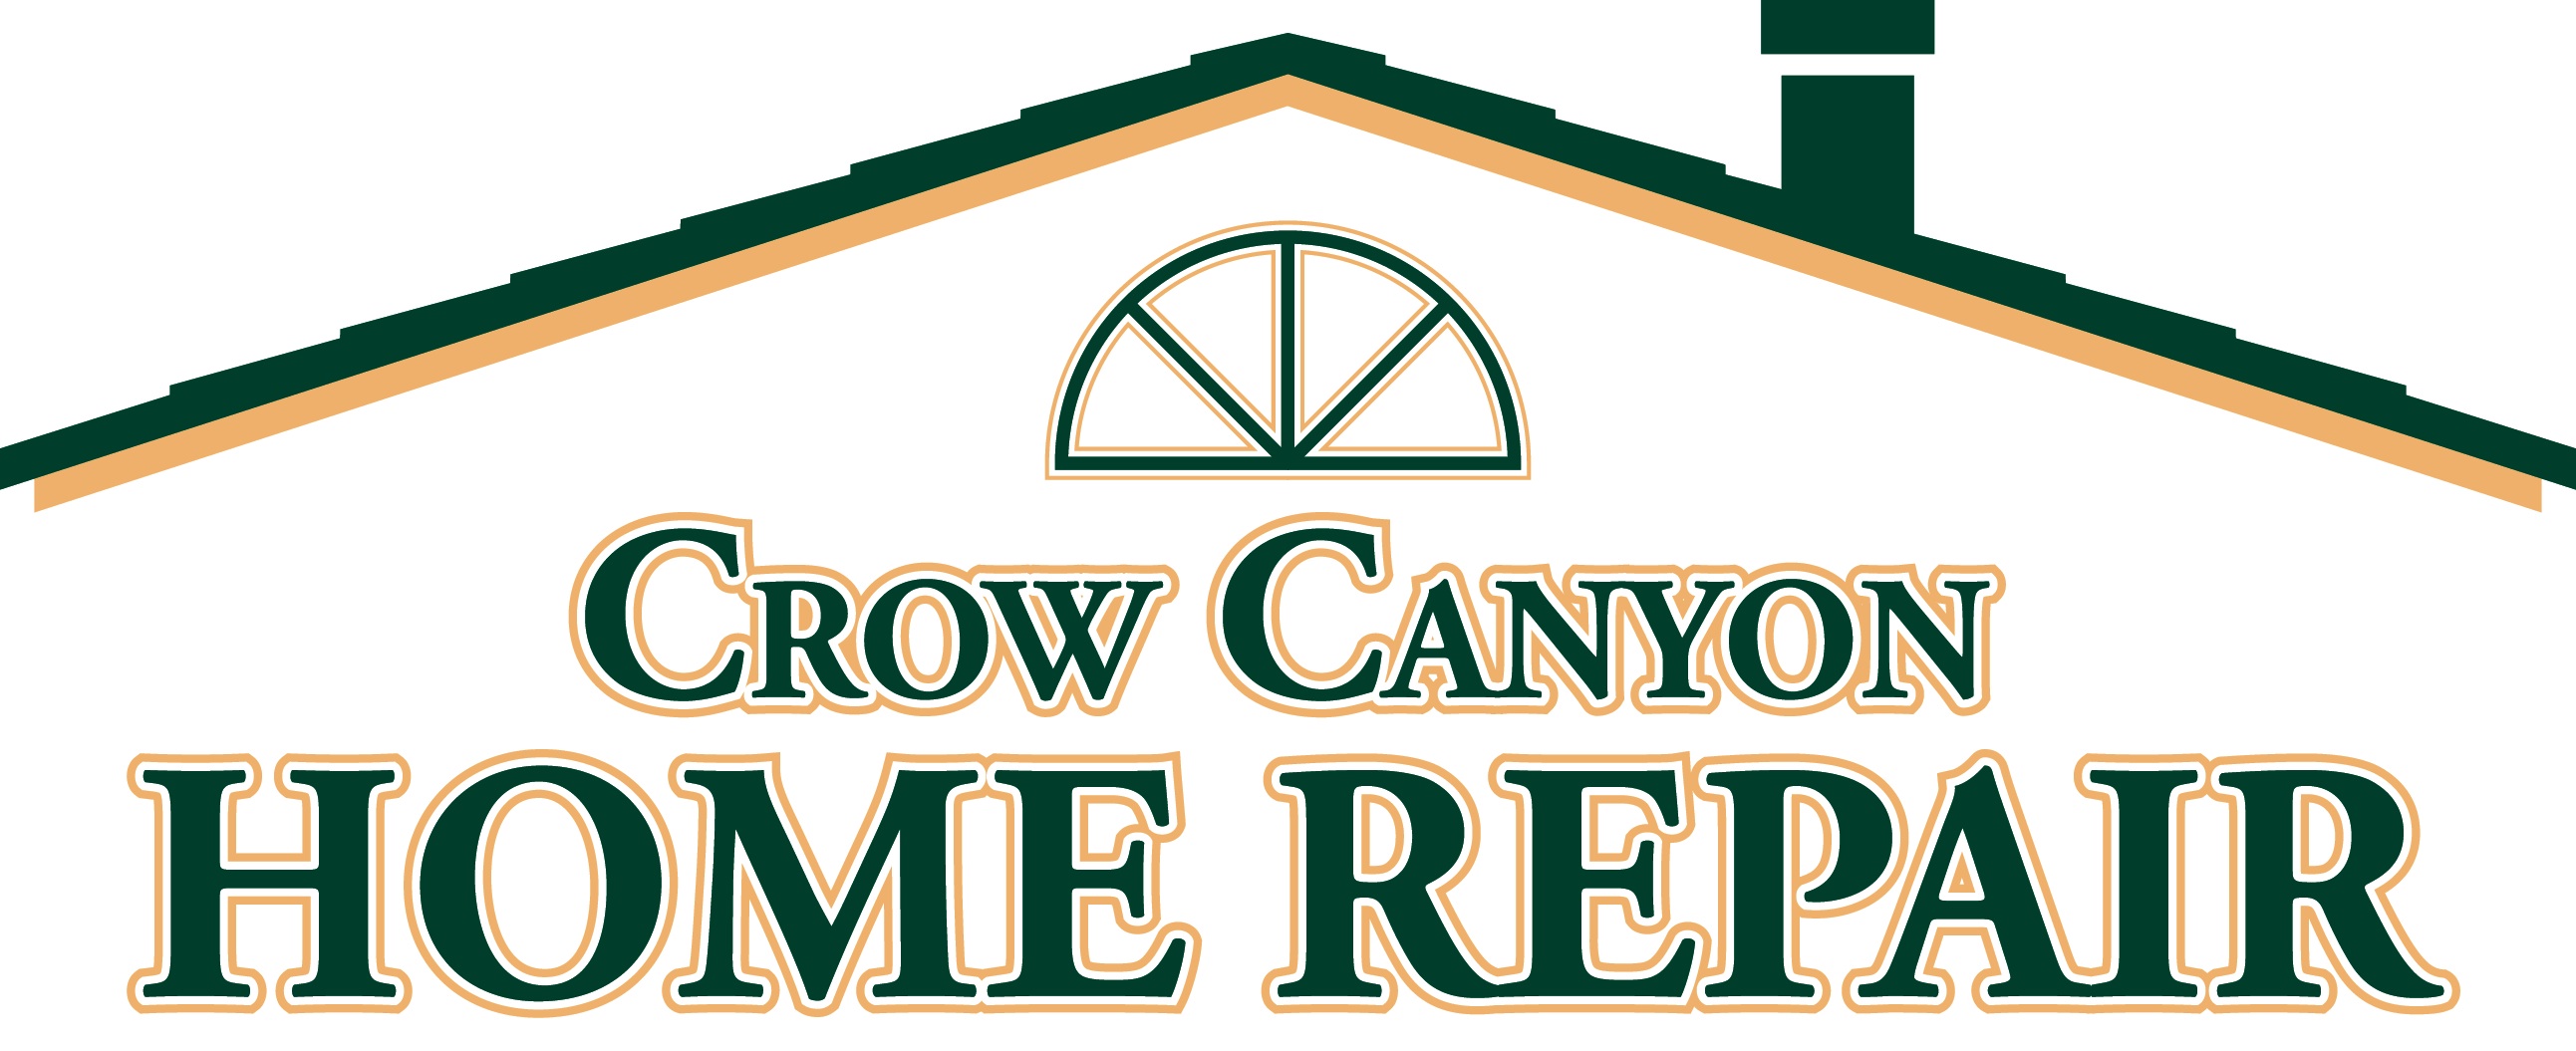 Crow Canyon Home Repair & Remodeling - Home - ClipArt Best ...